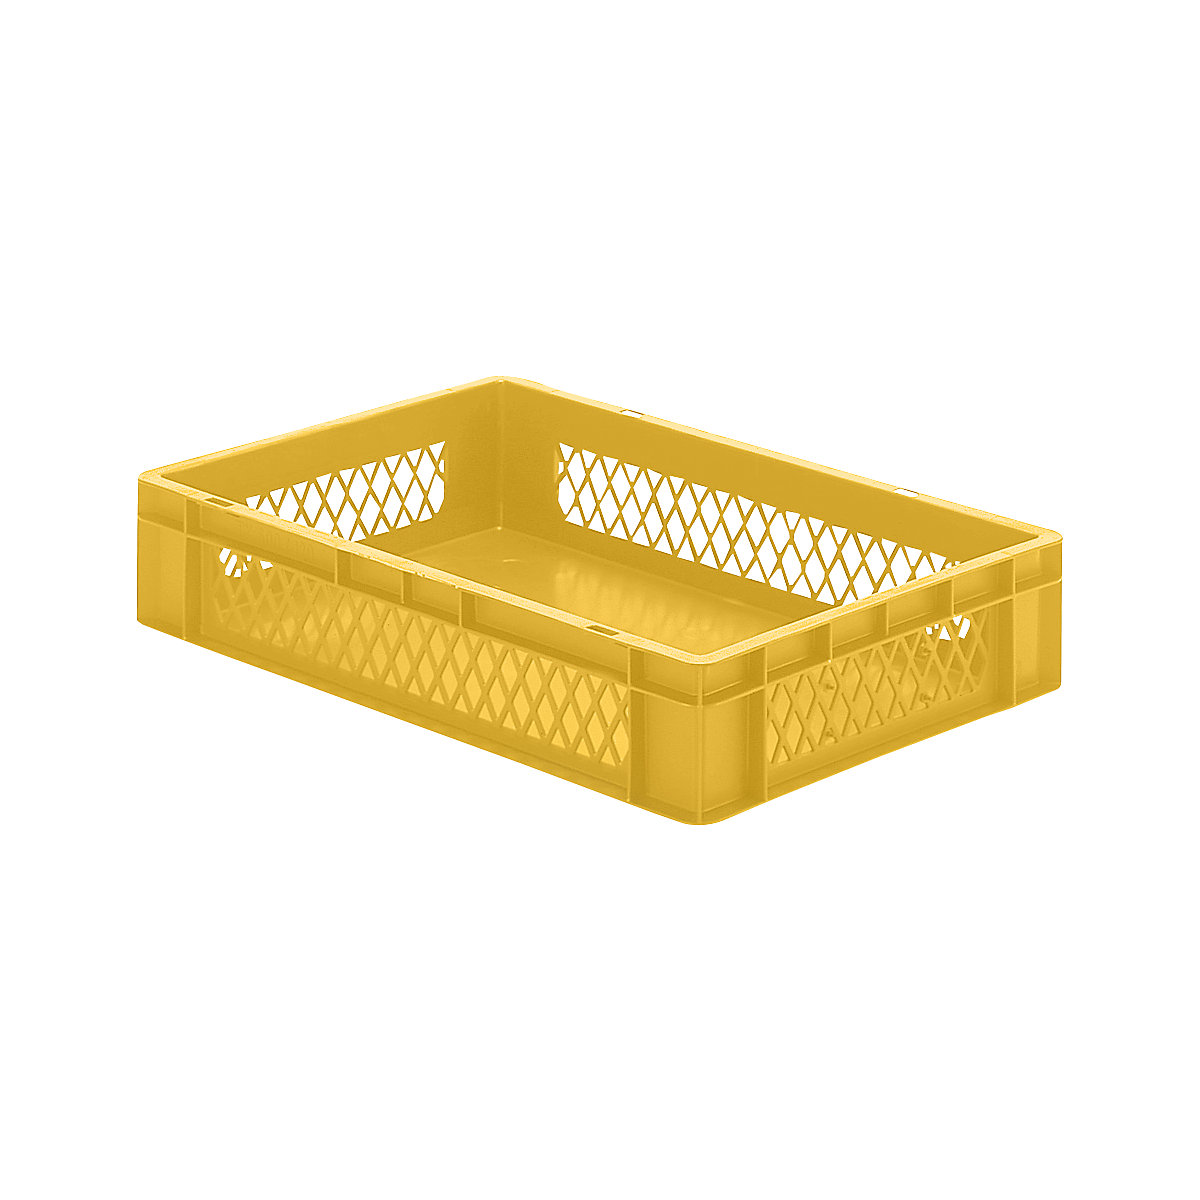 Euro stacking container, perforated walls, closed base, LxWxH 600 x 400 x 120 mm, yellow, pack of 5